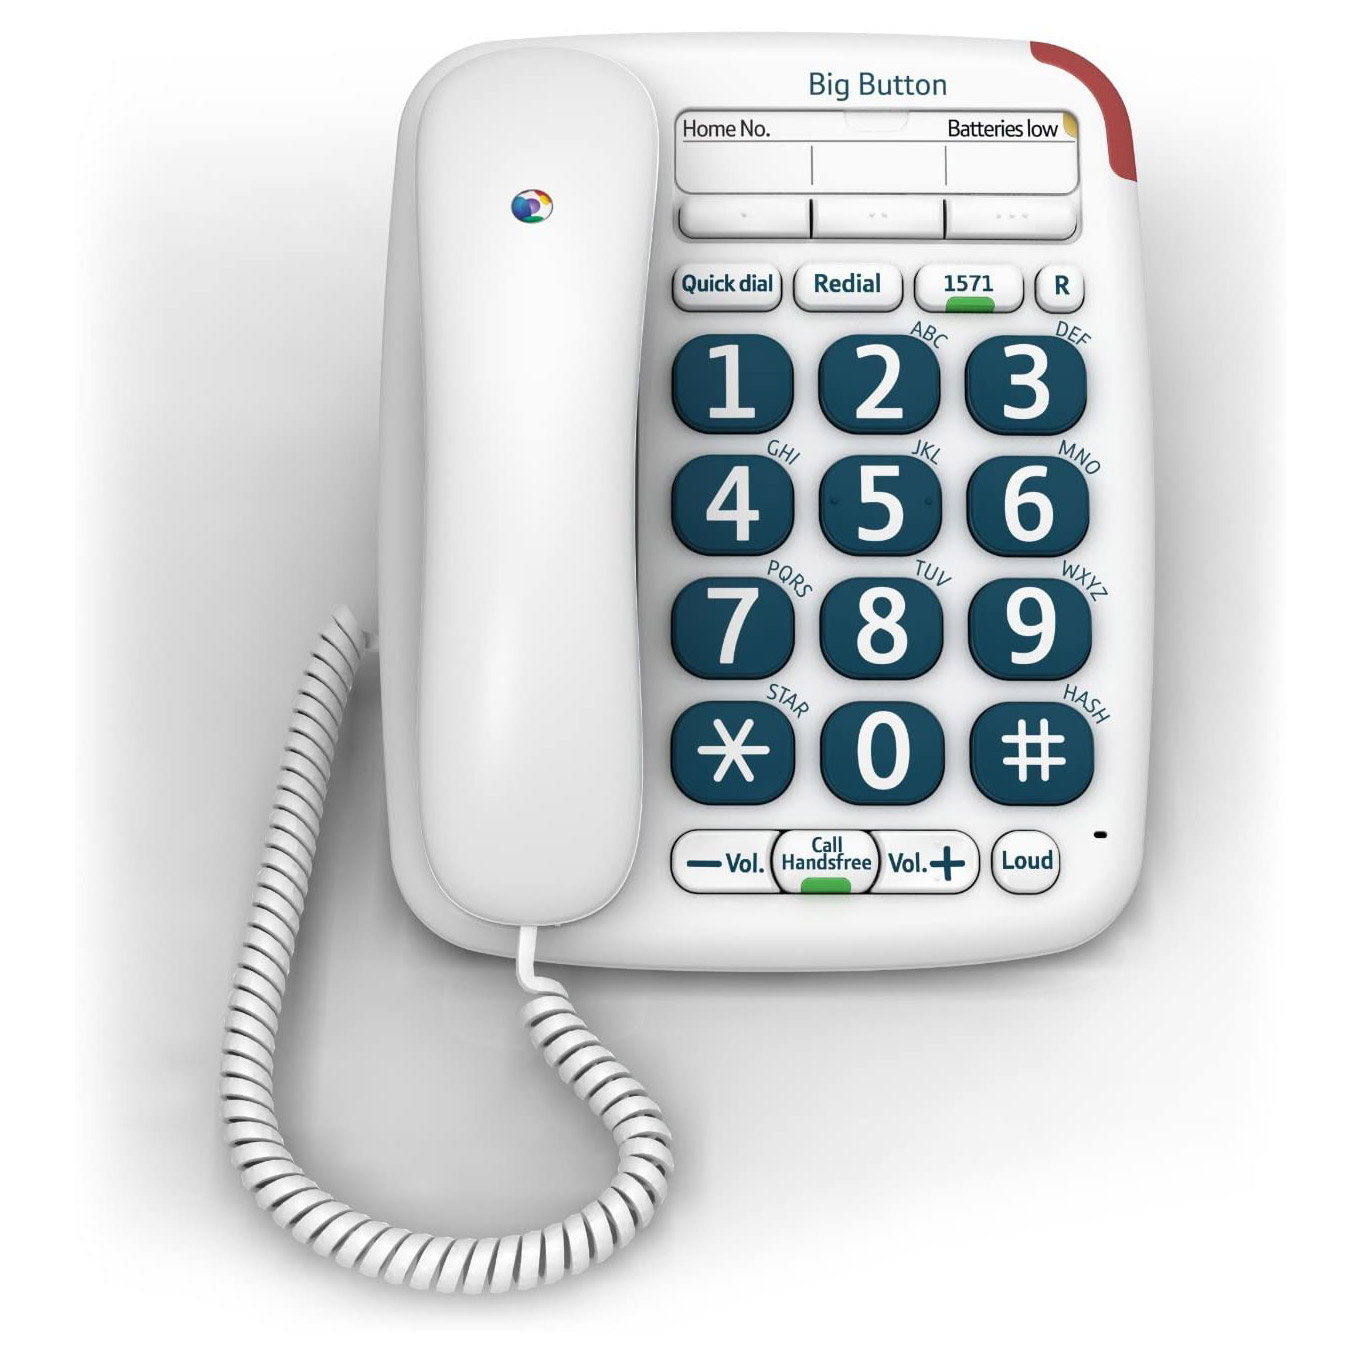 Image of BT 061130 BT Big Button 200 Corded Telephone in White